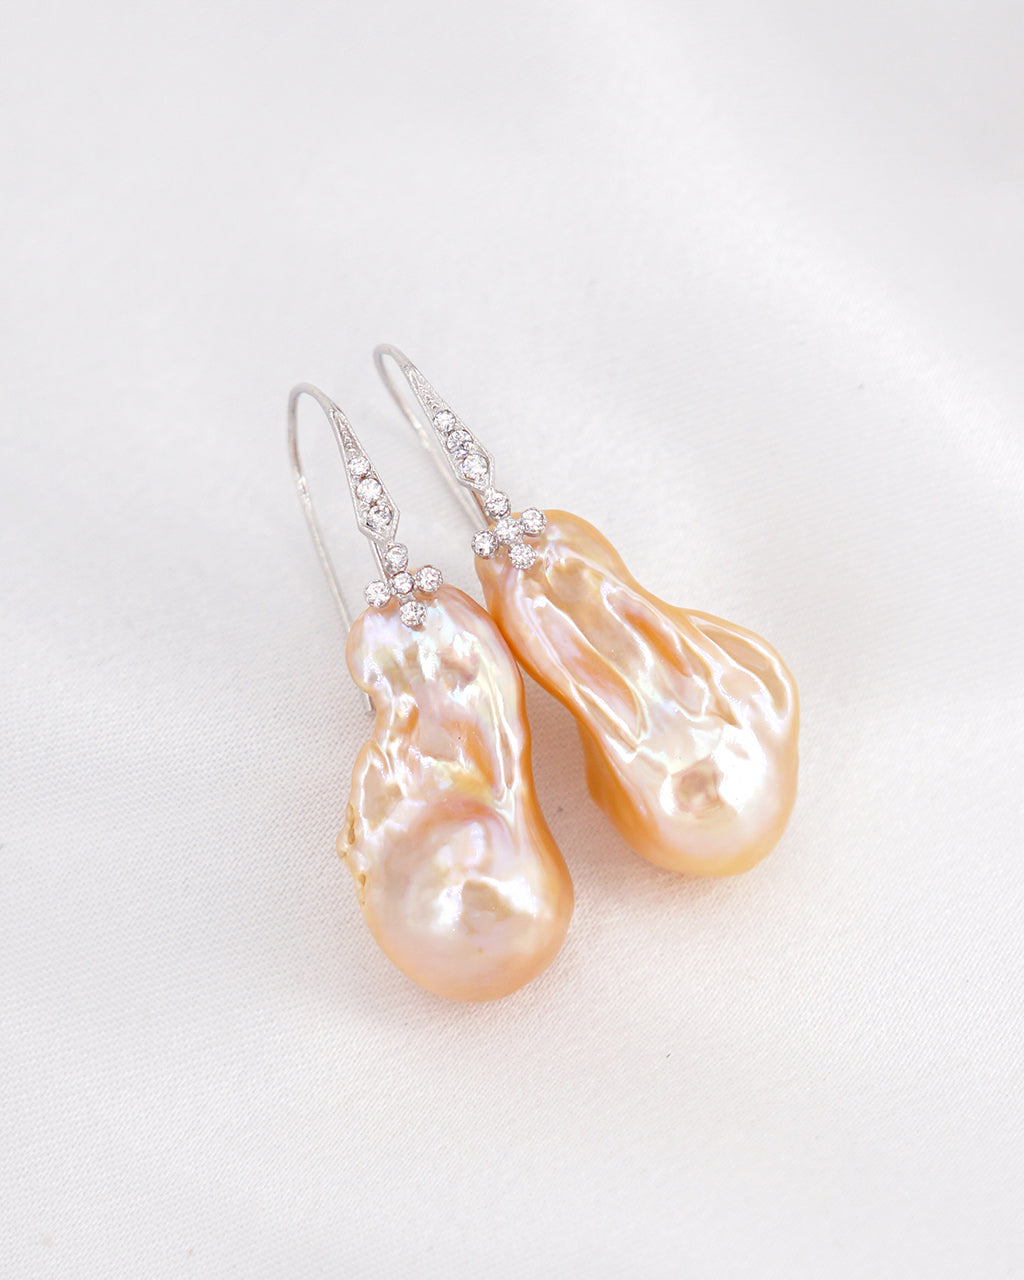 Elegant Baroque Pearl Earrings - Golden Flameball - Wedding Bridal Jewelry for Brides and Bridesmaids | Singapore